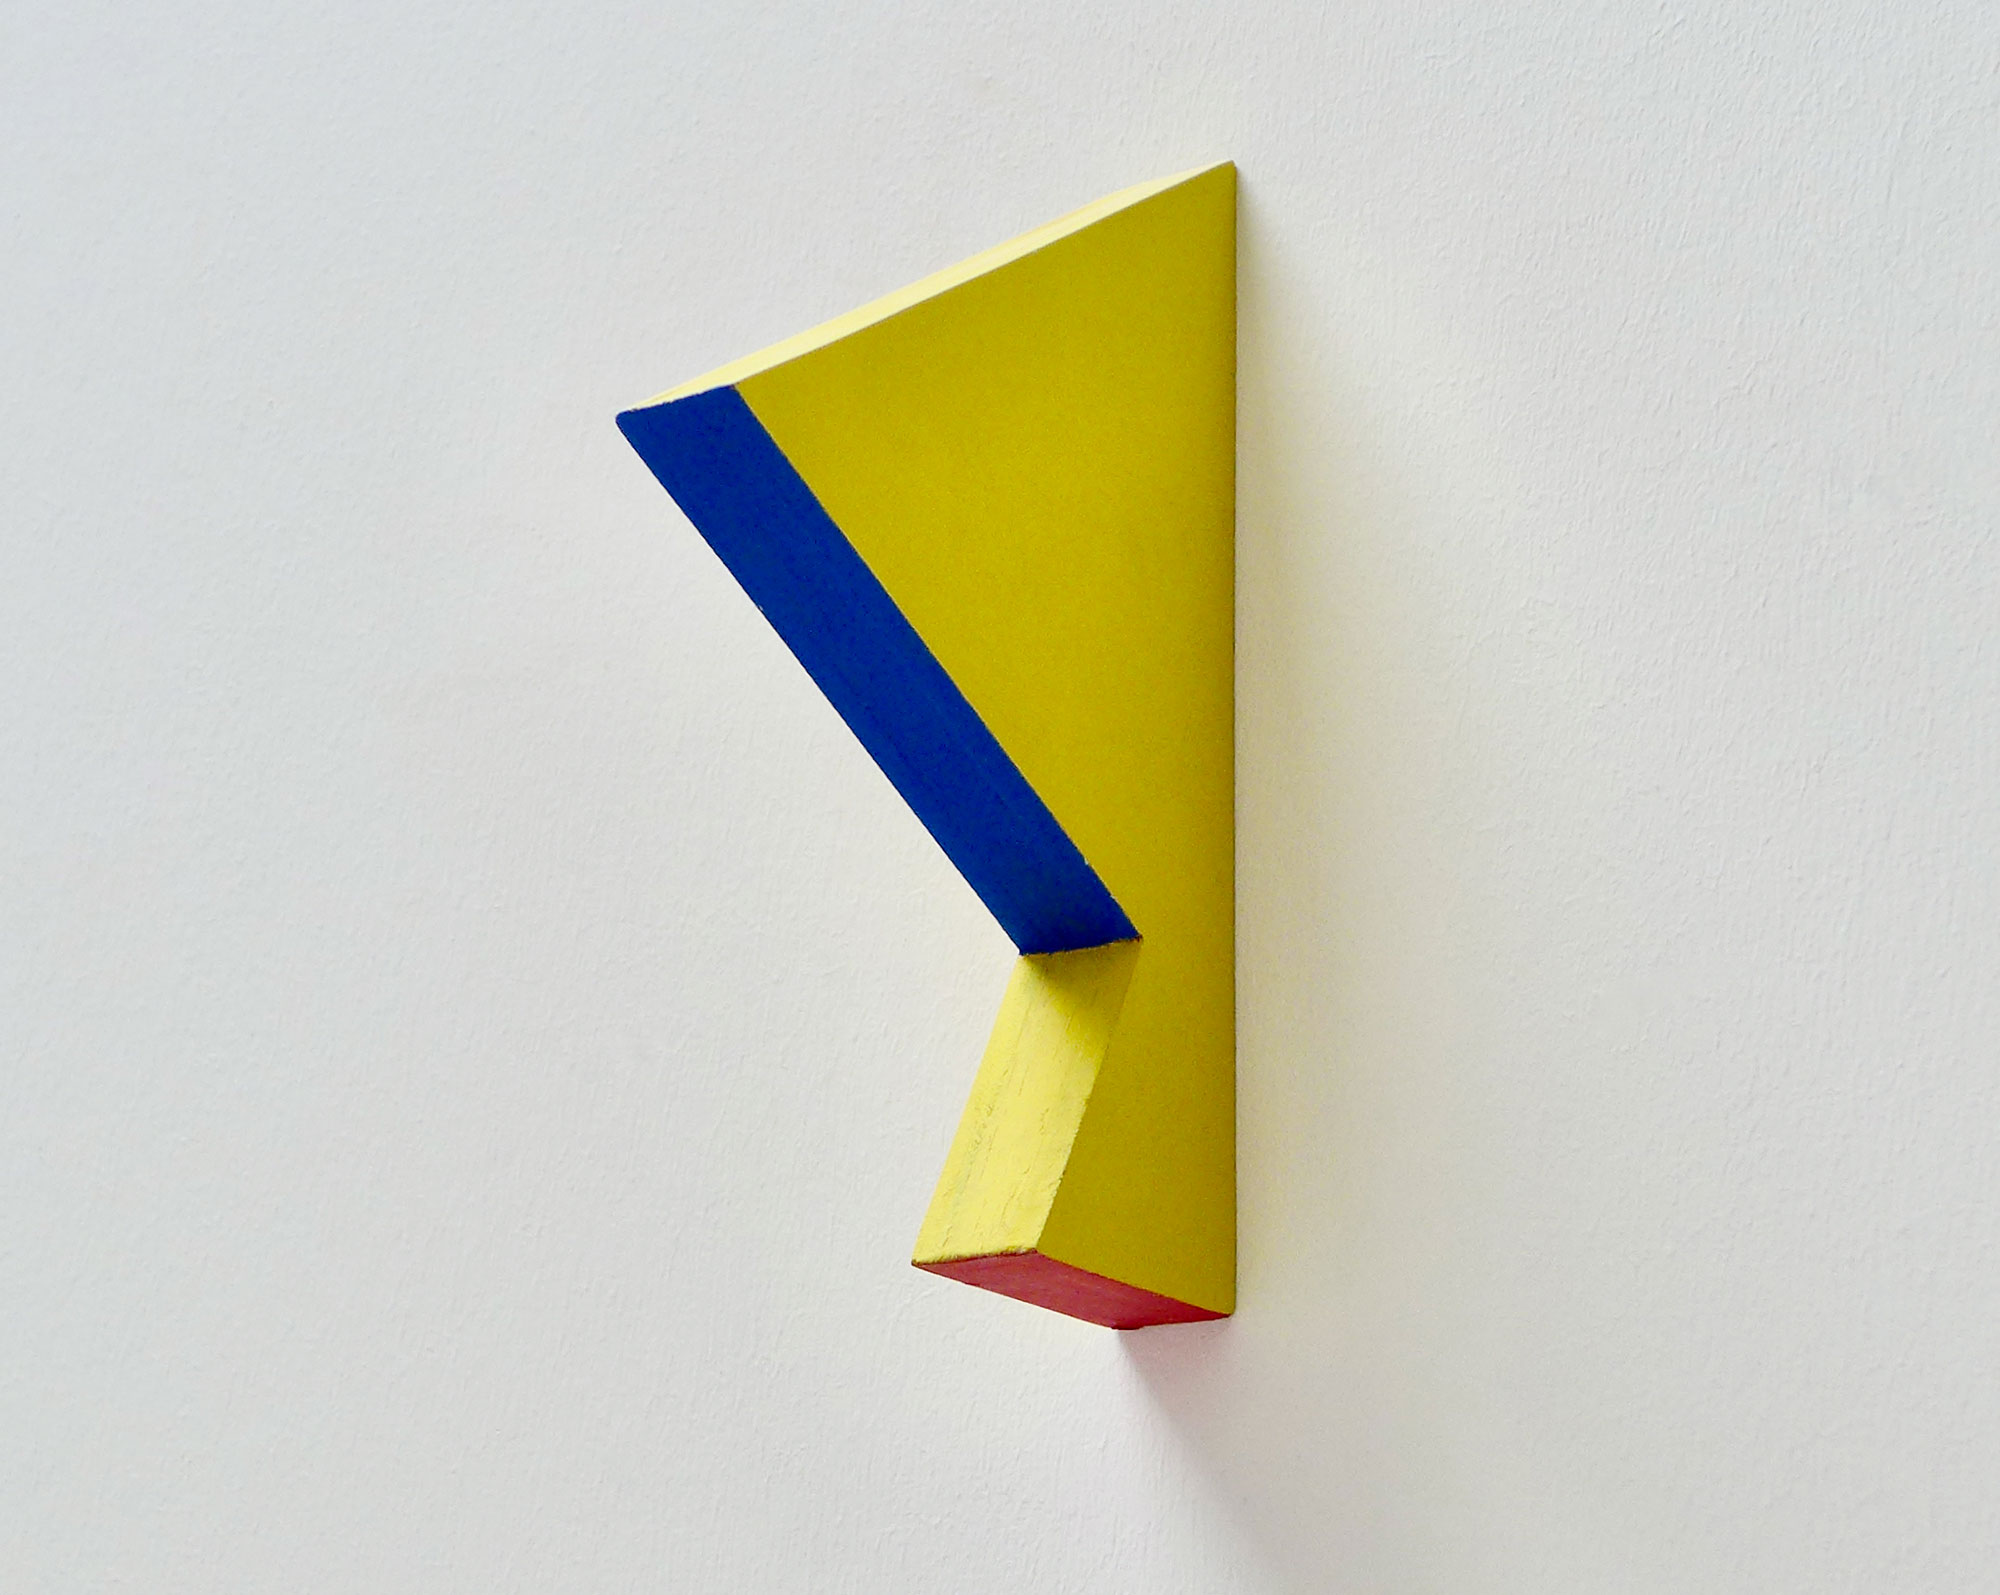 Kenneth Dingwall, Another, 2011, casein on plywood and basswood, 20cm x 25cm x 13.5cm